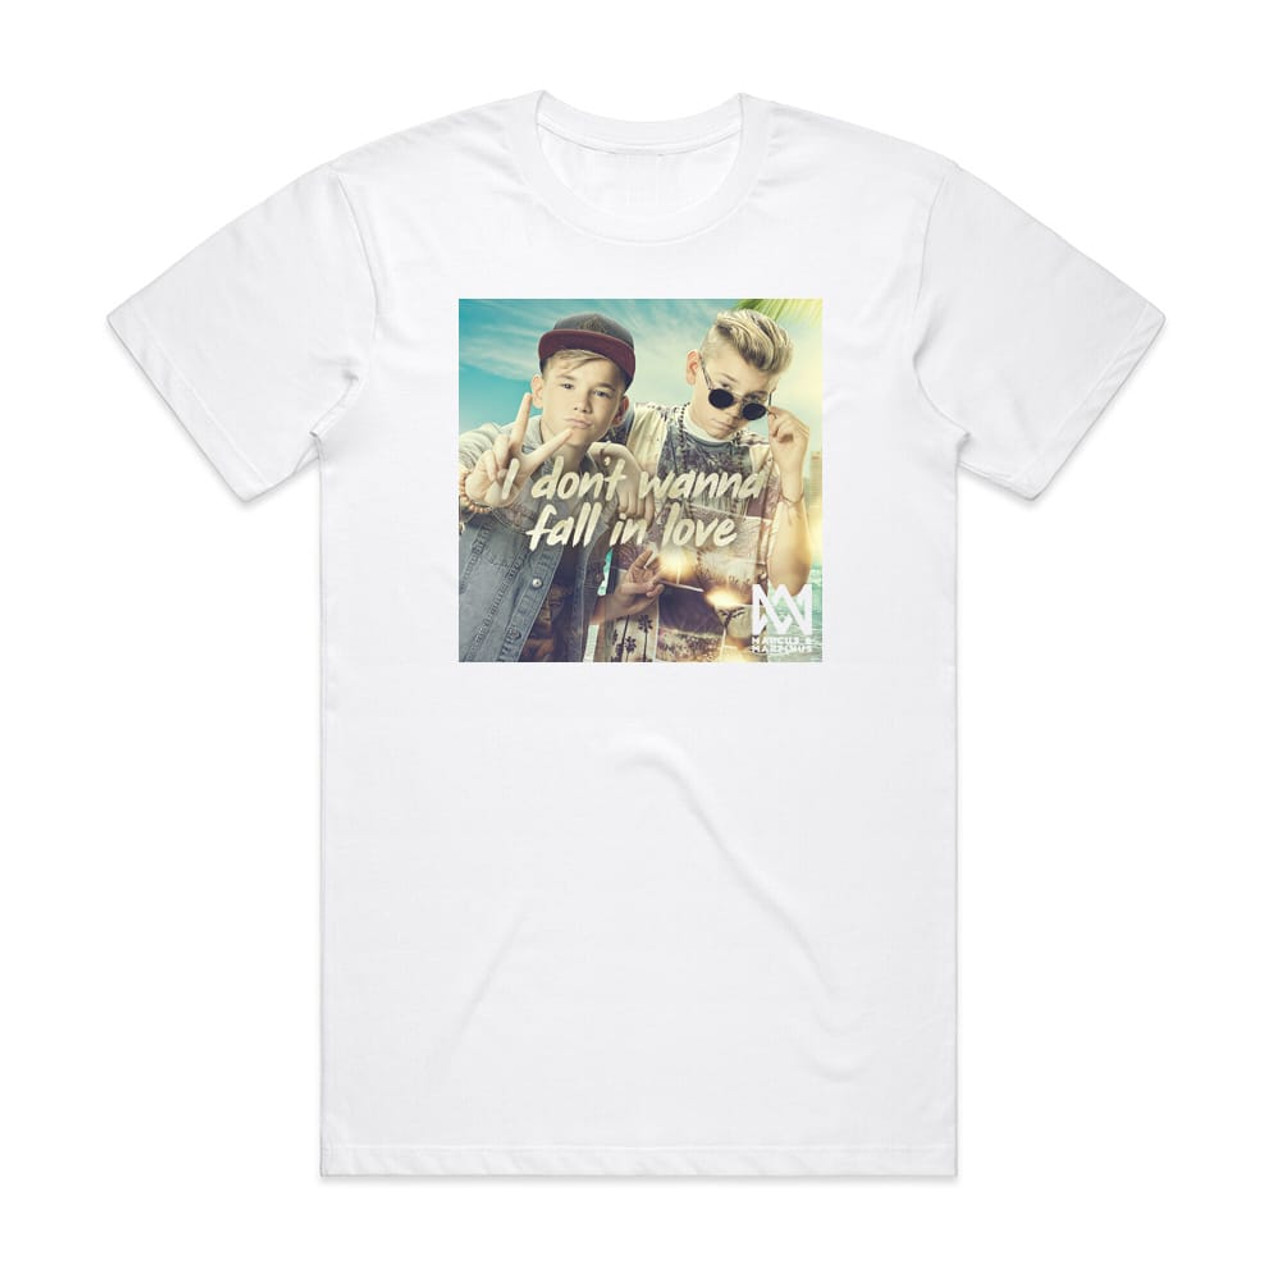 Marcus and I Dont Wanna Fall In Love Album Cover T-Shirt